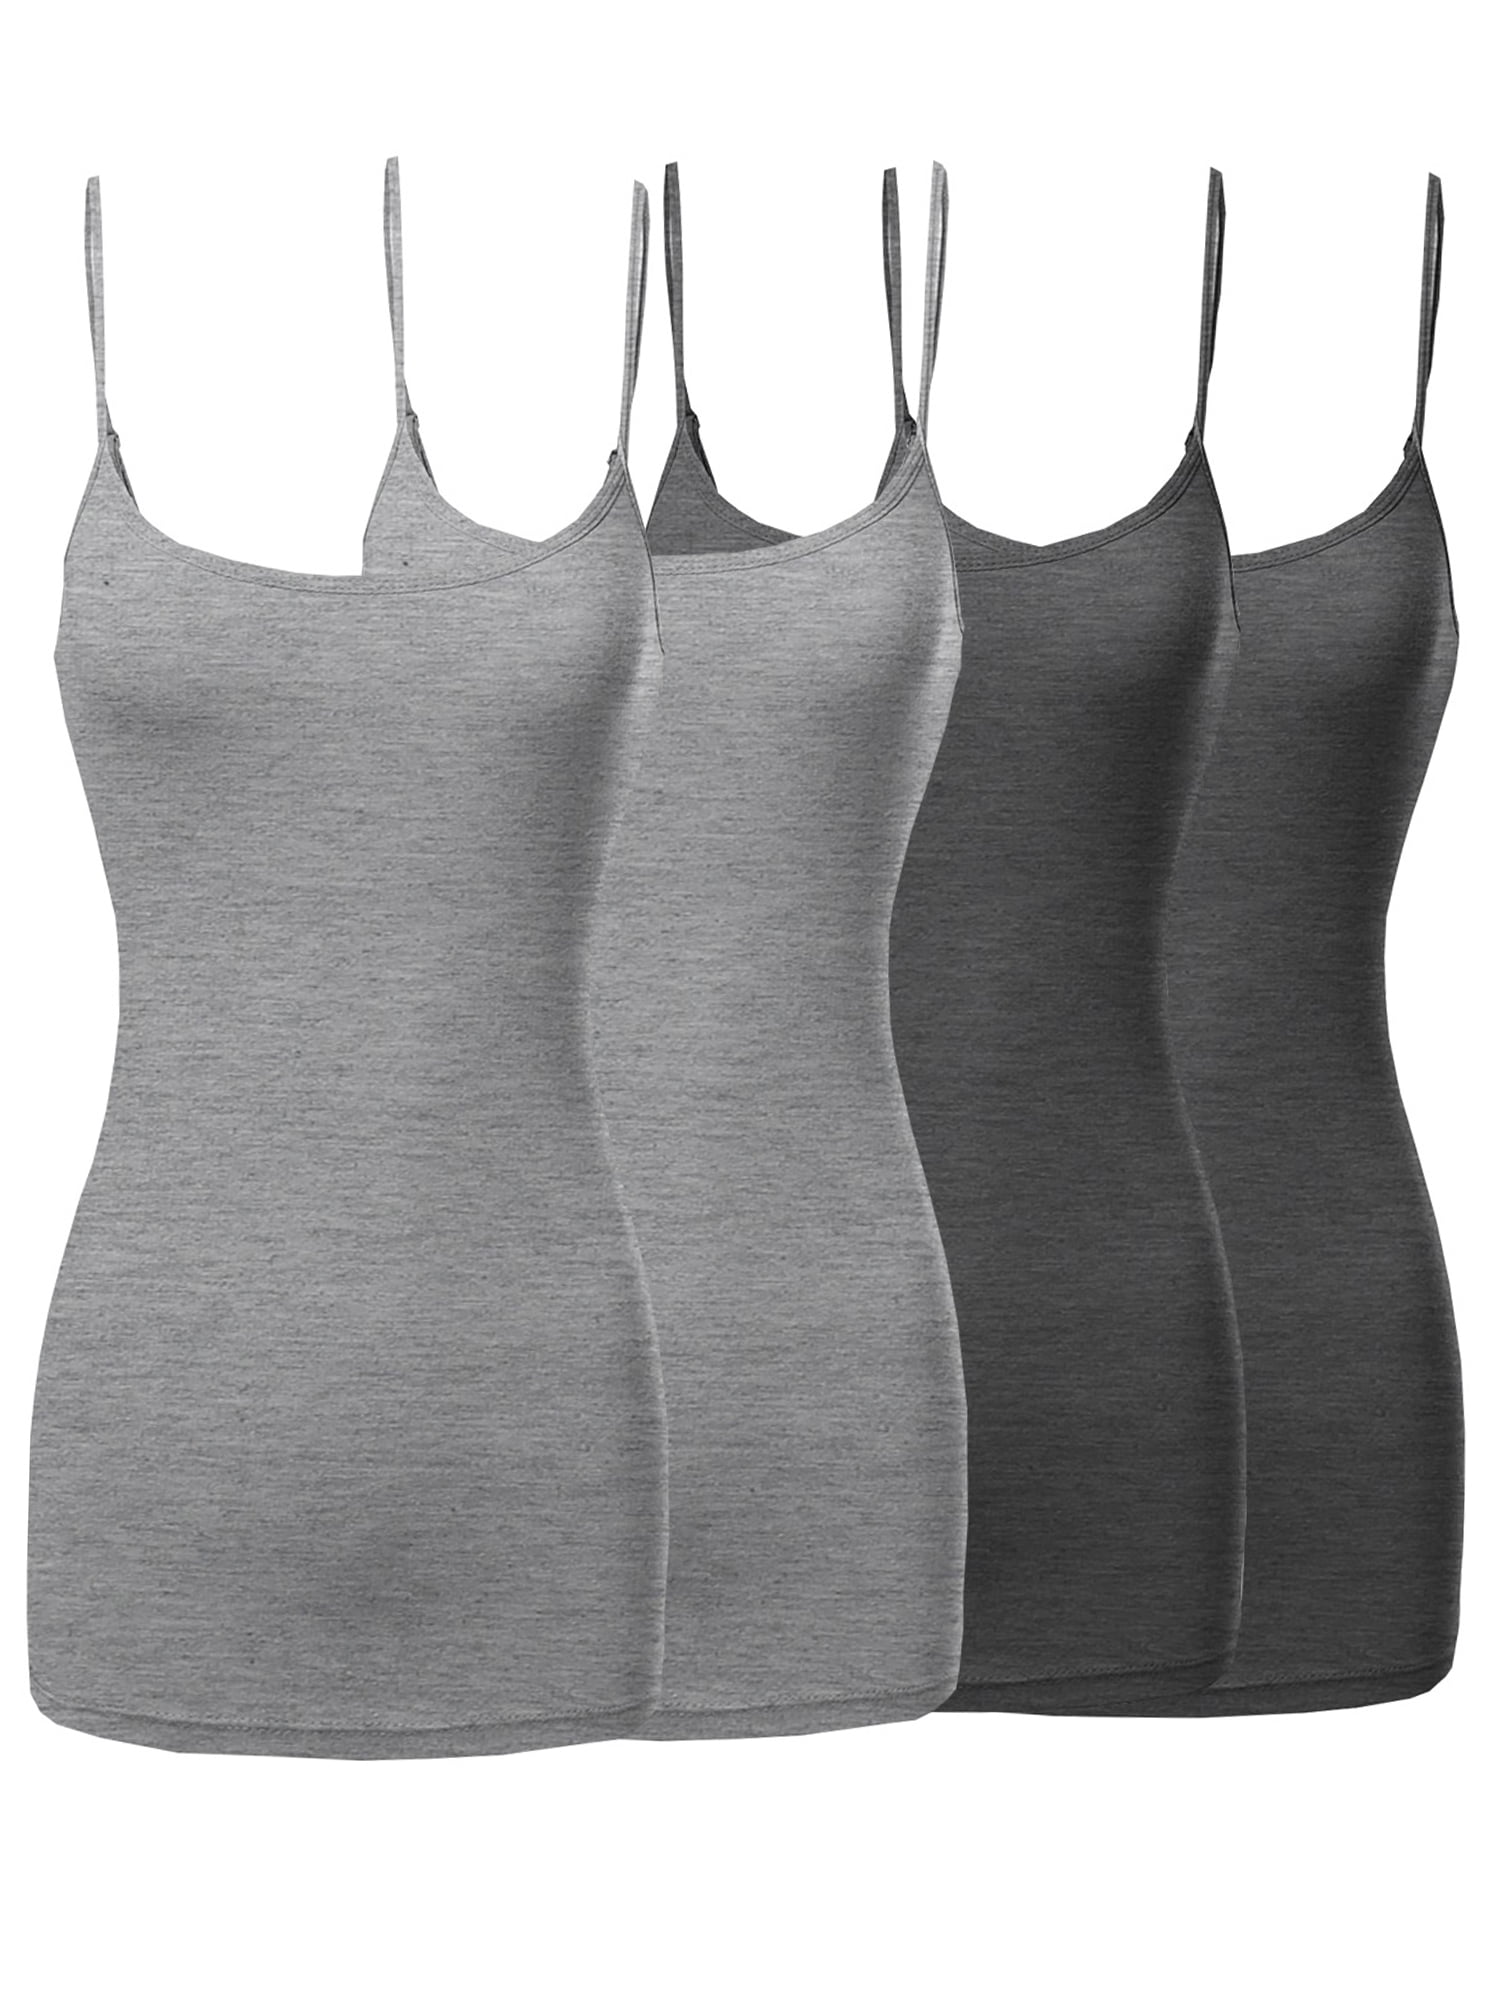 Womens & Juniors Basic Solid Long Length Adjustable Spaghetti Strap  Camisole Tank Top (4PK - H. Grey/H. Grey/Charcoal/Charcoal, M)